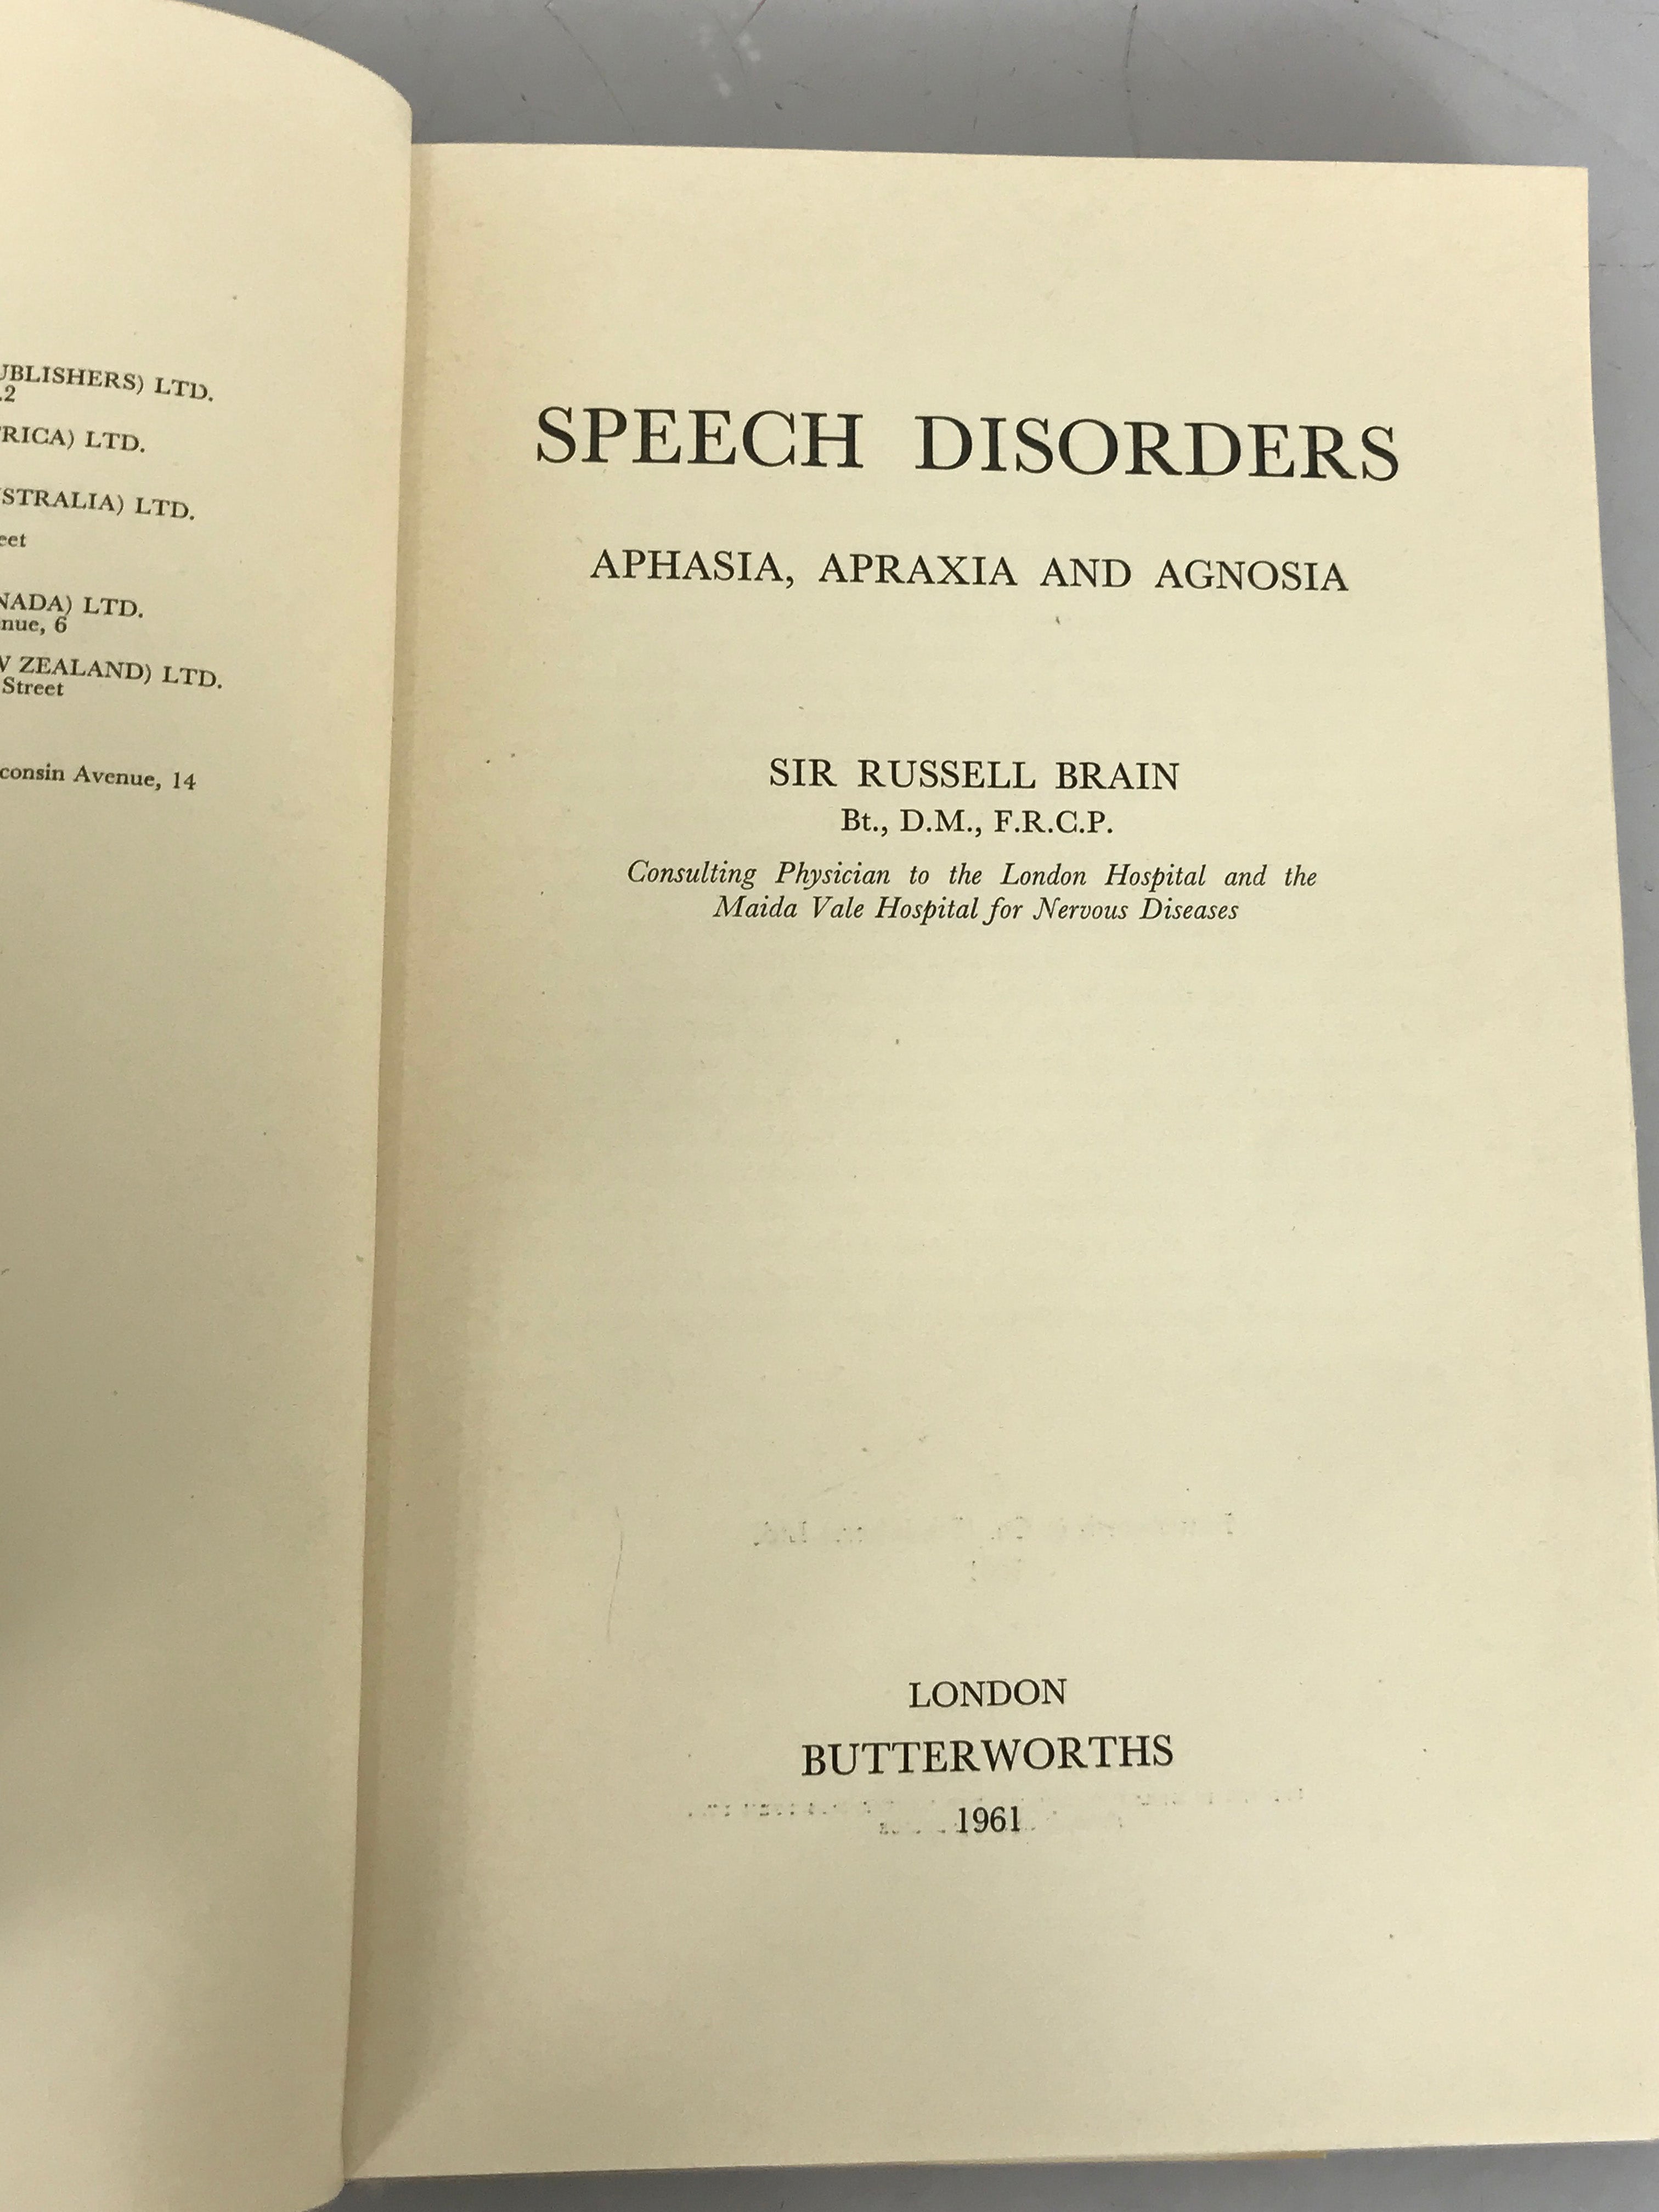 Lot of 2 Speech Disorder Books: Agnosia, Apraxia, Aphasia by Nielsen (1962) and Speech Disorders by Russell Brain (1961) HC DJ